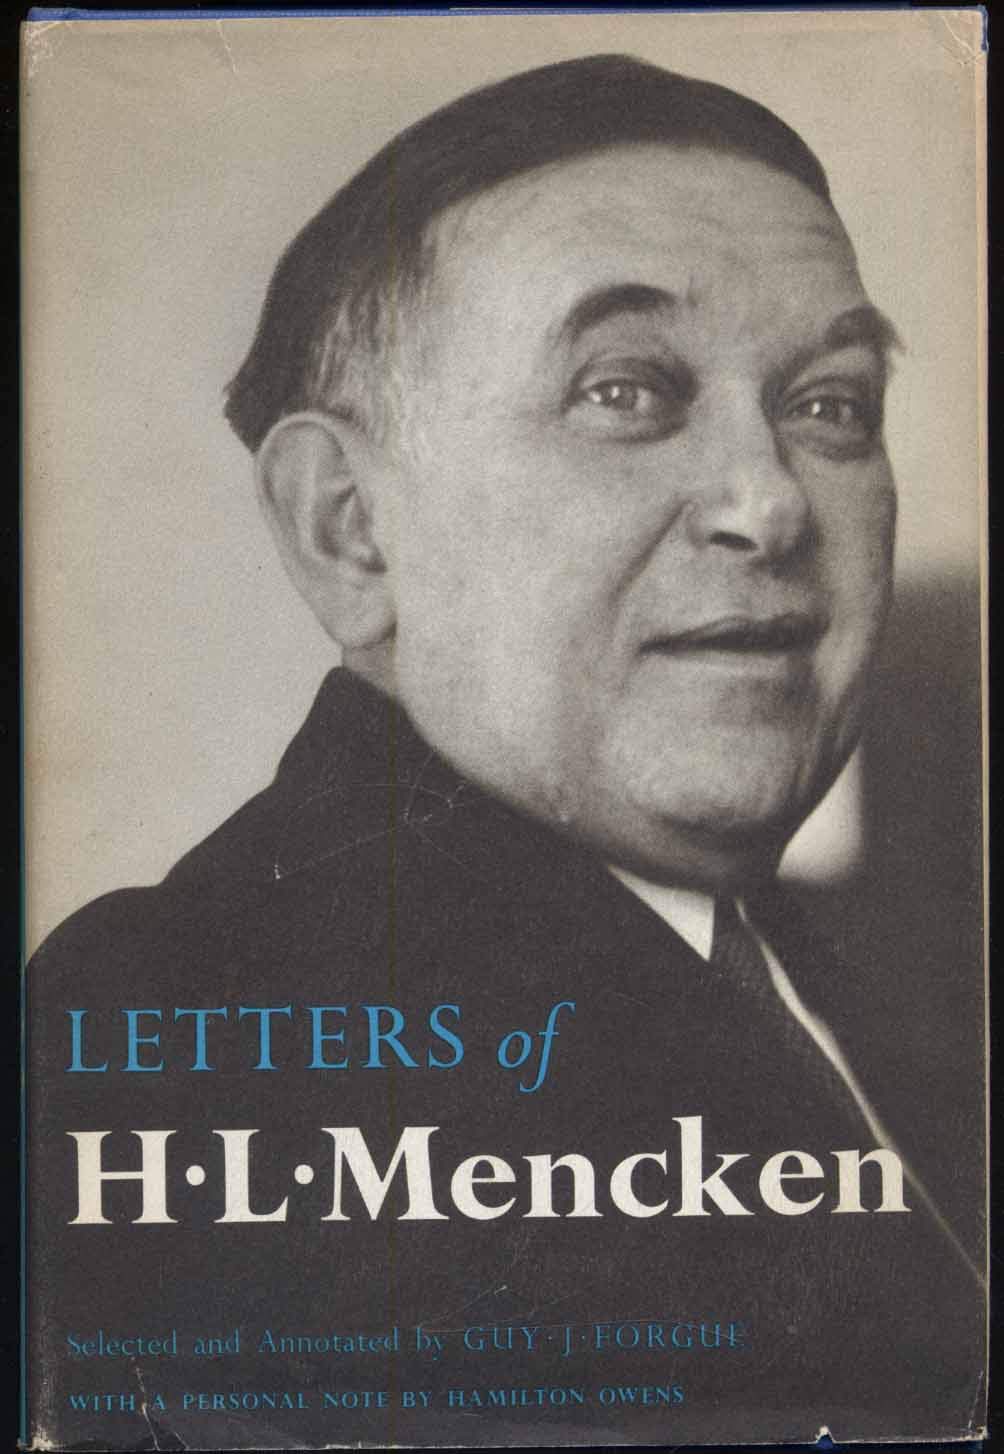 Book cover for "The Letters of H.L. Mencken"